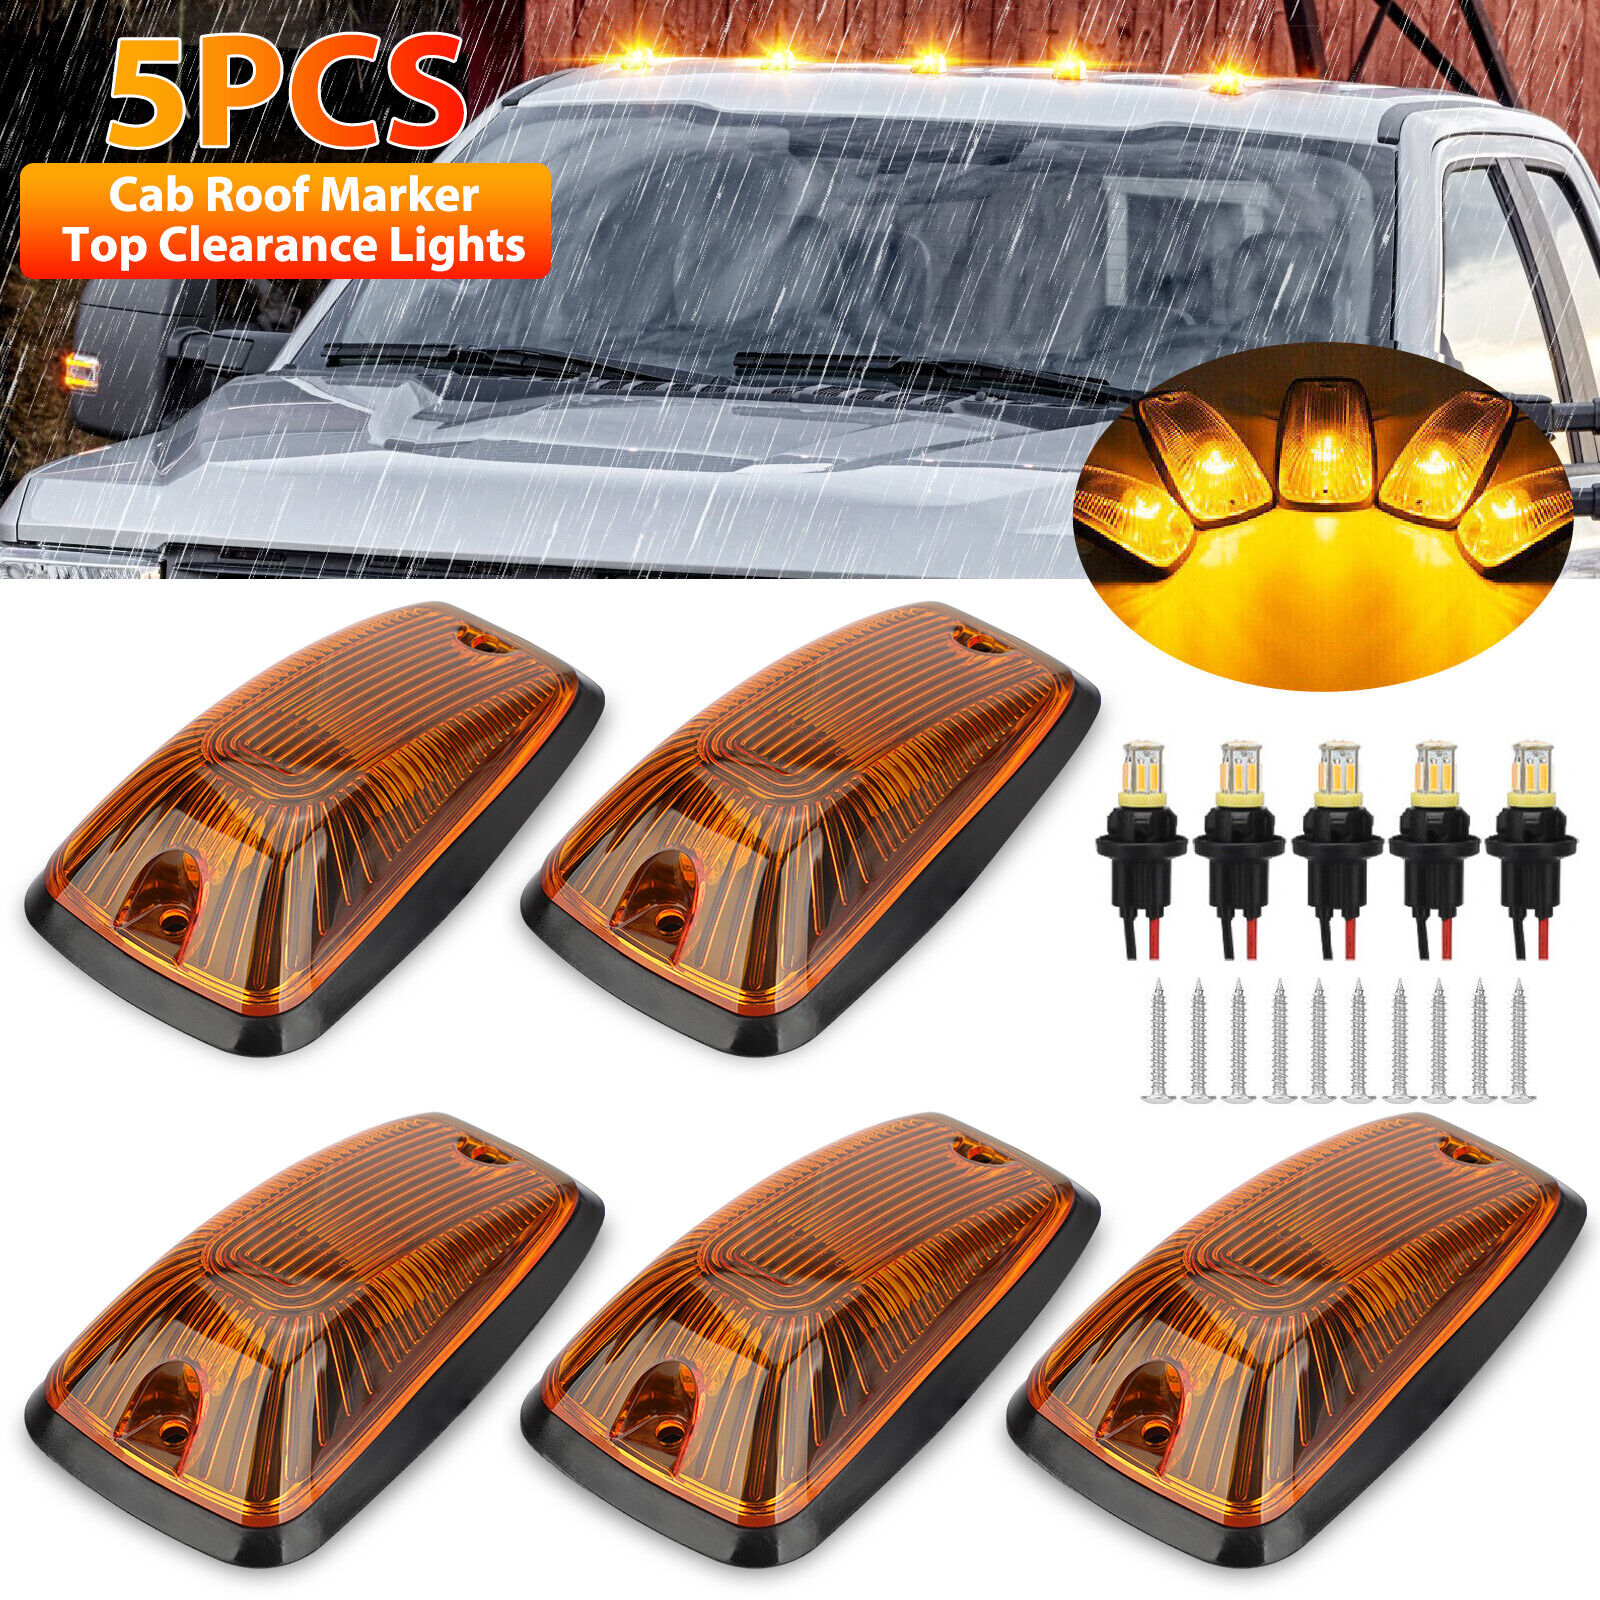 5x Clear Lens Amber LED Cab Marker Roof Light for 88-02 Chevy/GMC Pickup Trucks